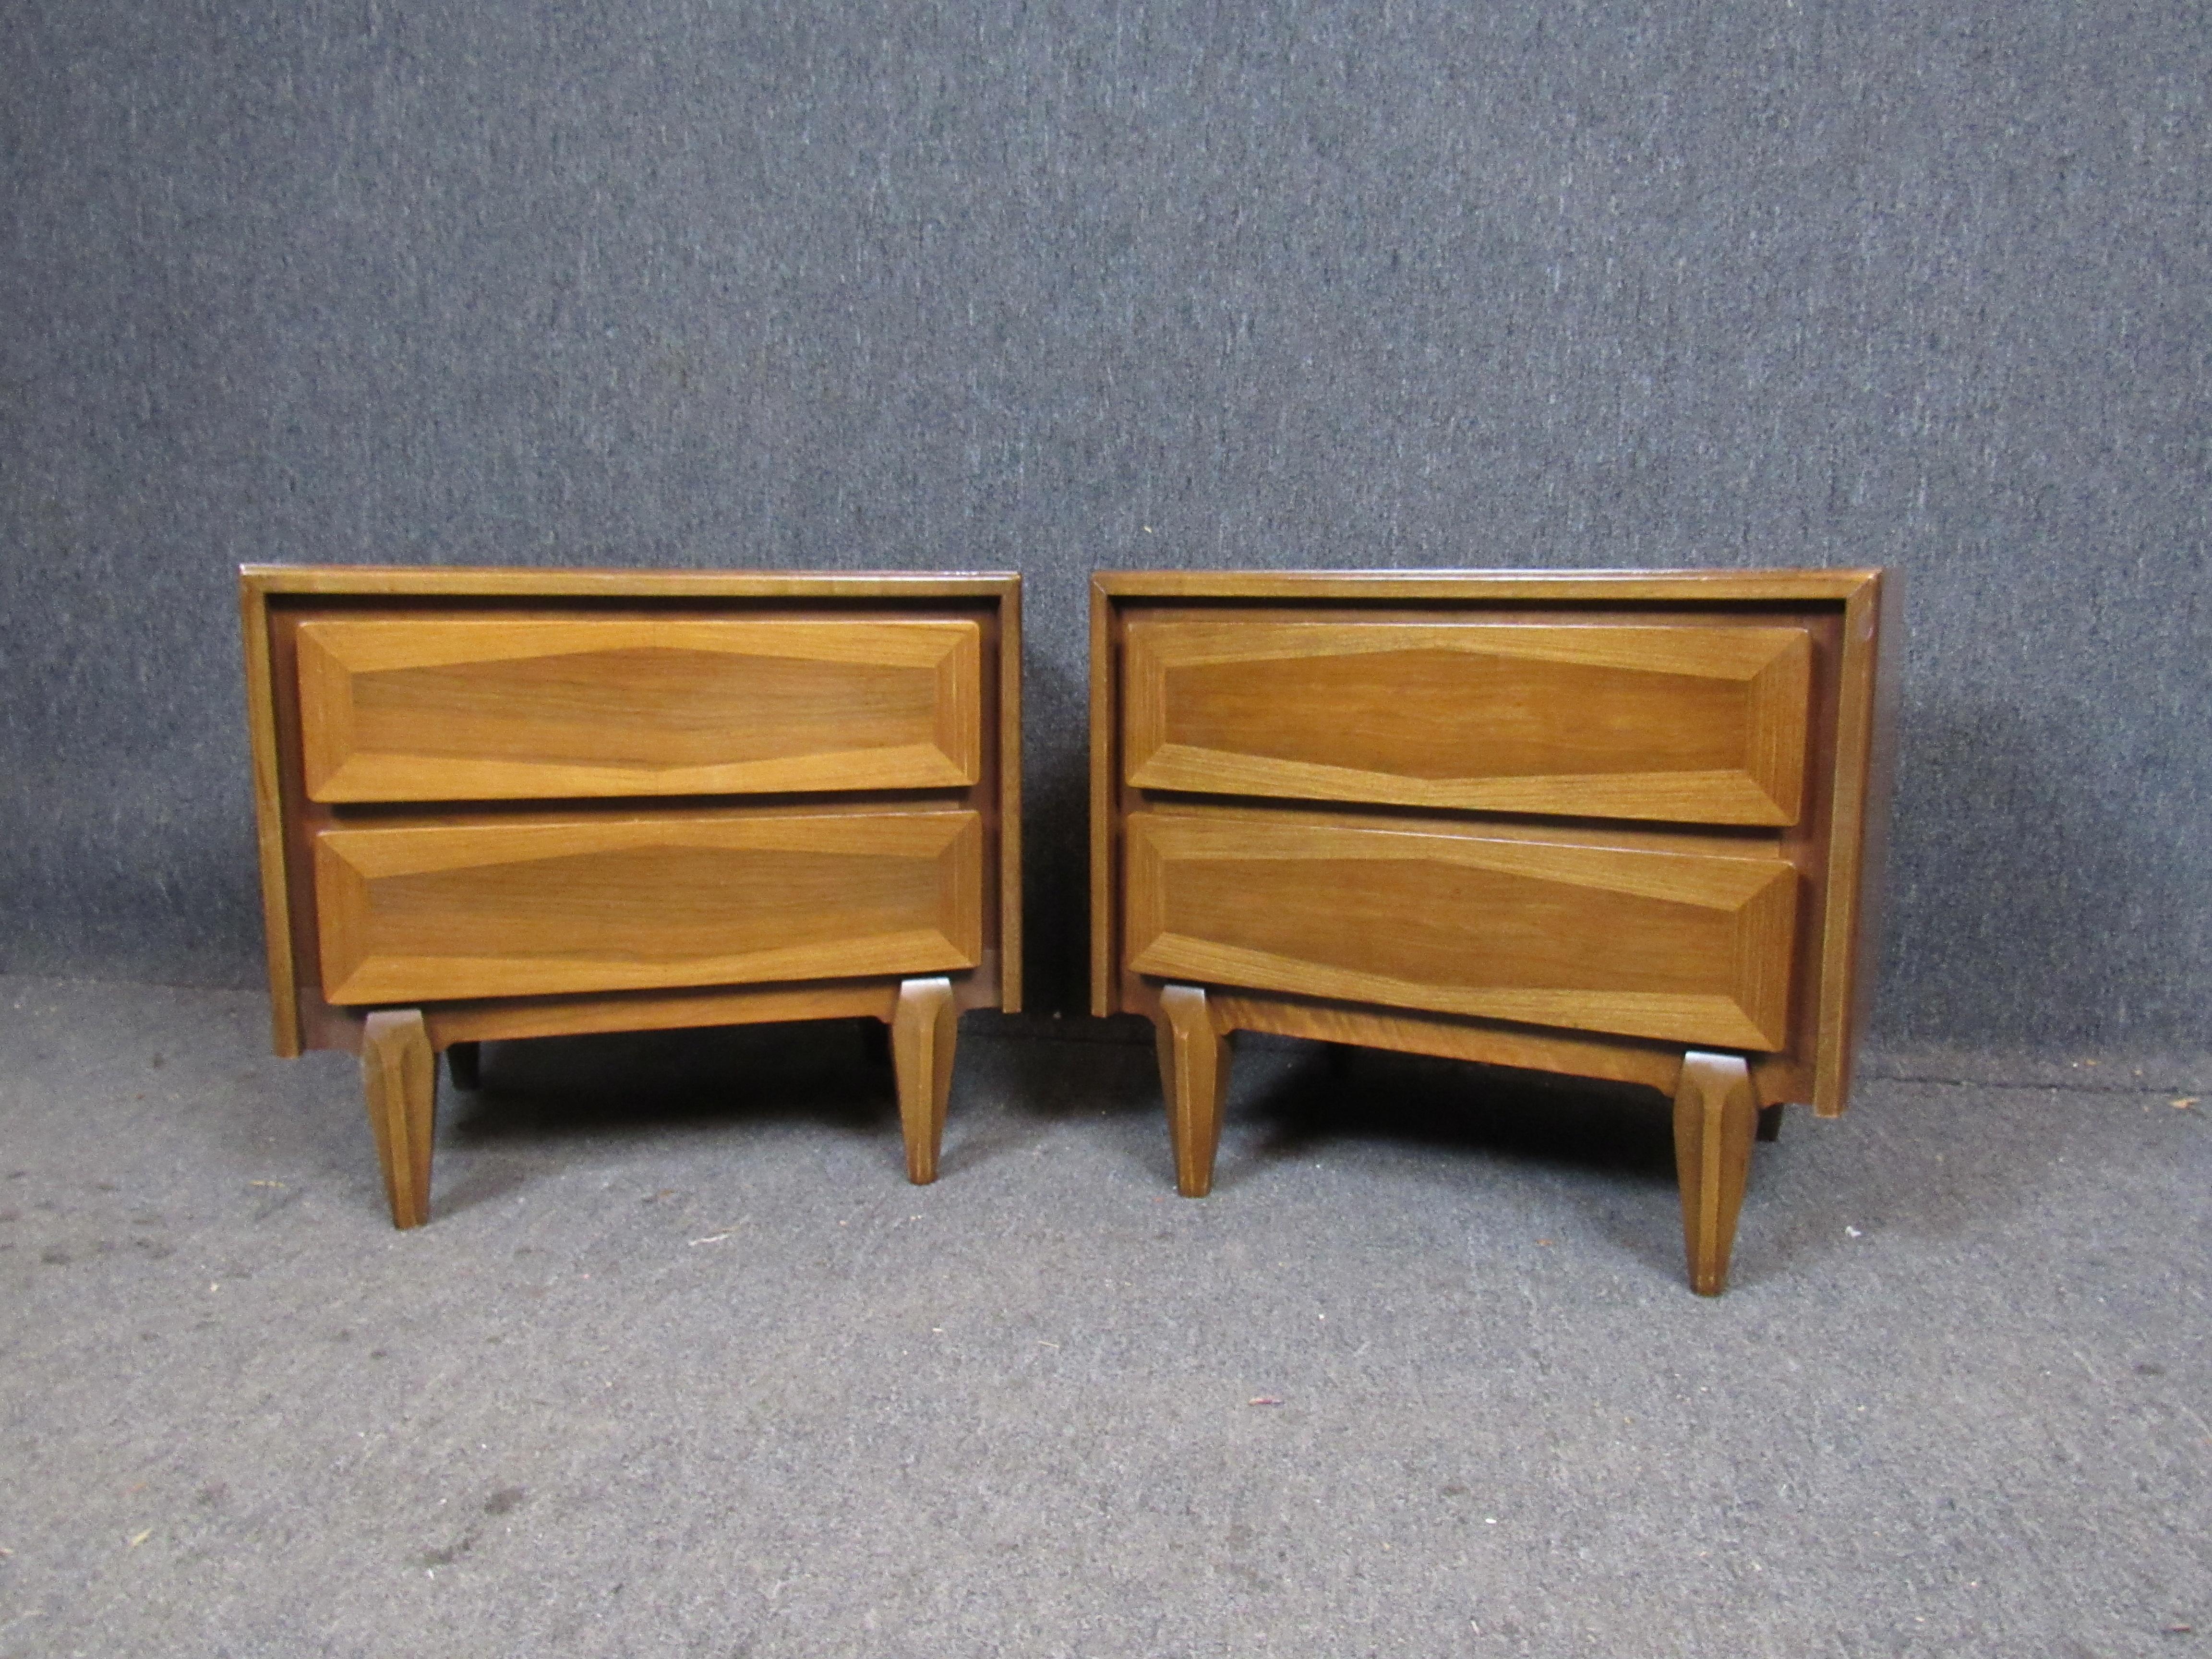 Fantastic pair of vintage night stands by the American of Martinsville furniture company. Beautifully carved legs lend an almost Primitive feel to an otherwise Classic Mid-Century Modern dual drawer design. Sure to work for a variety of uses in any